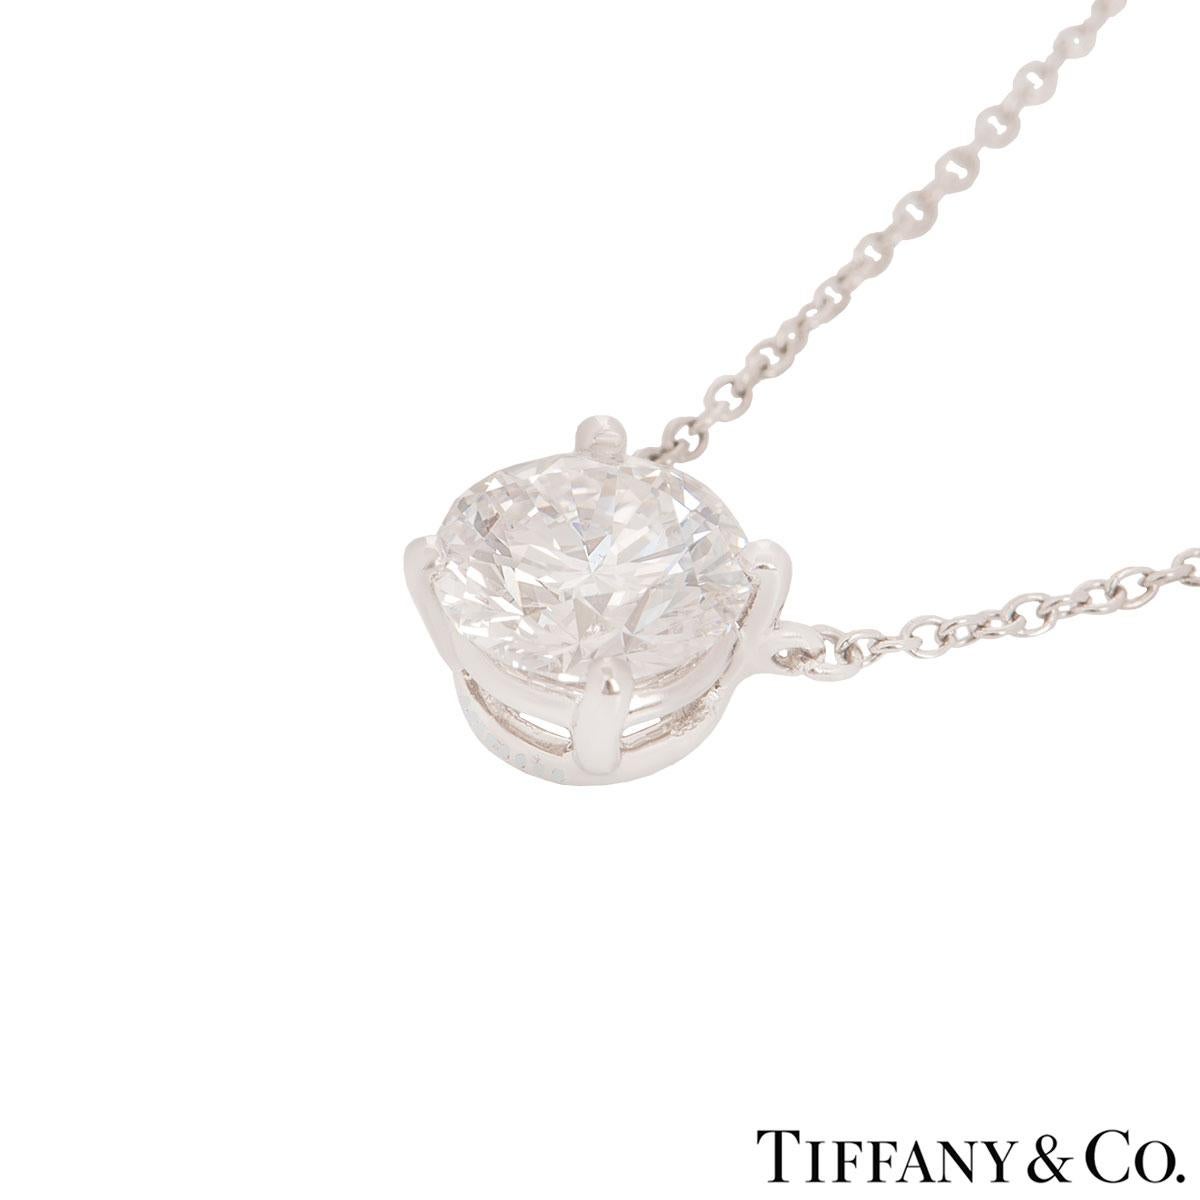 An elegant platinum diamond pendant by Tiffany & Co. The pendant features a single round brilliant cut diamond in a 4 claw setting with a weight of 1.45ct, F colour and VVS2 clarity. The diamond scores an excellent rating in all three aspects for